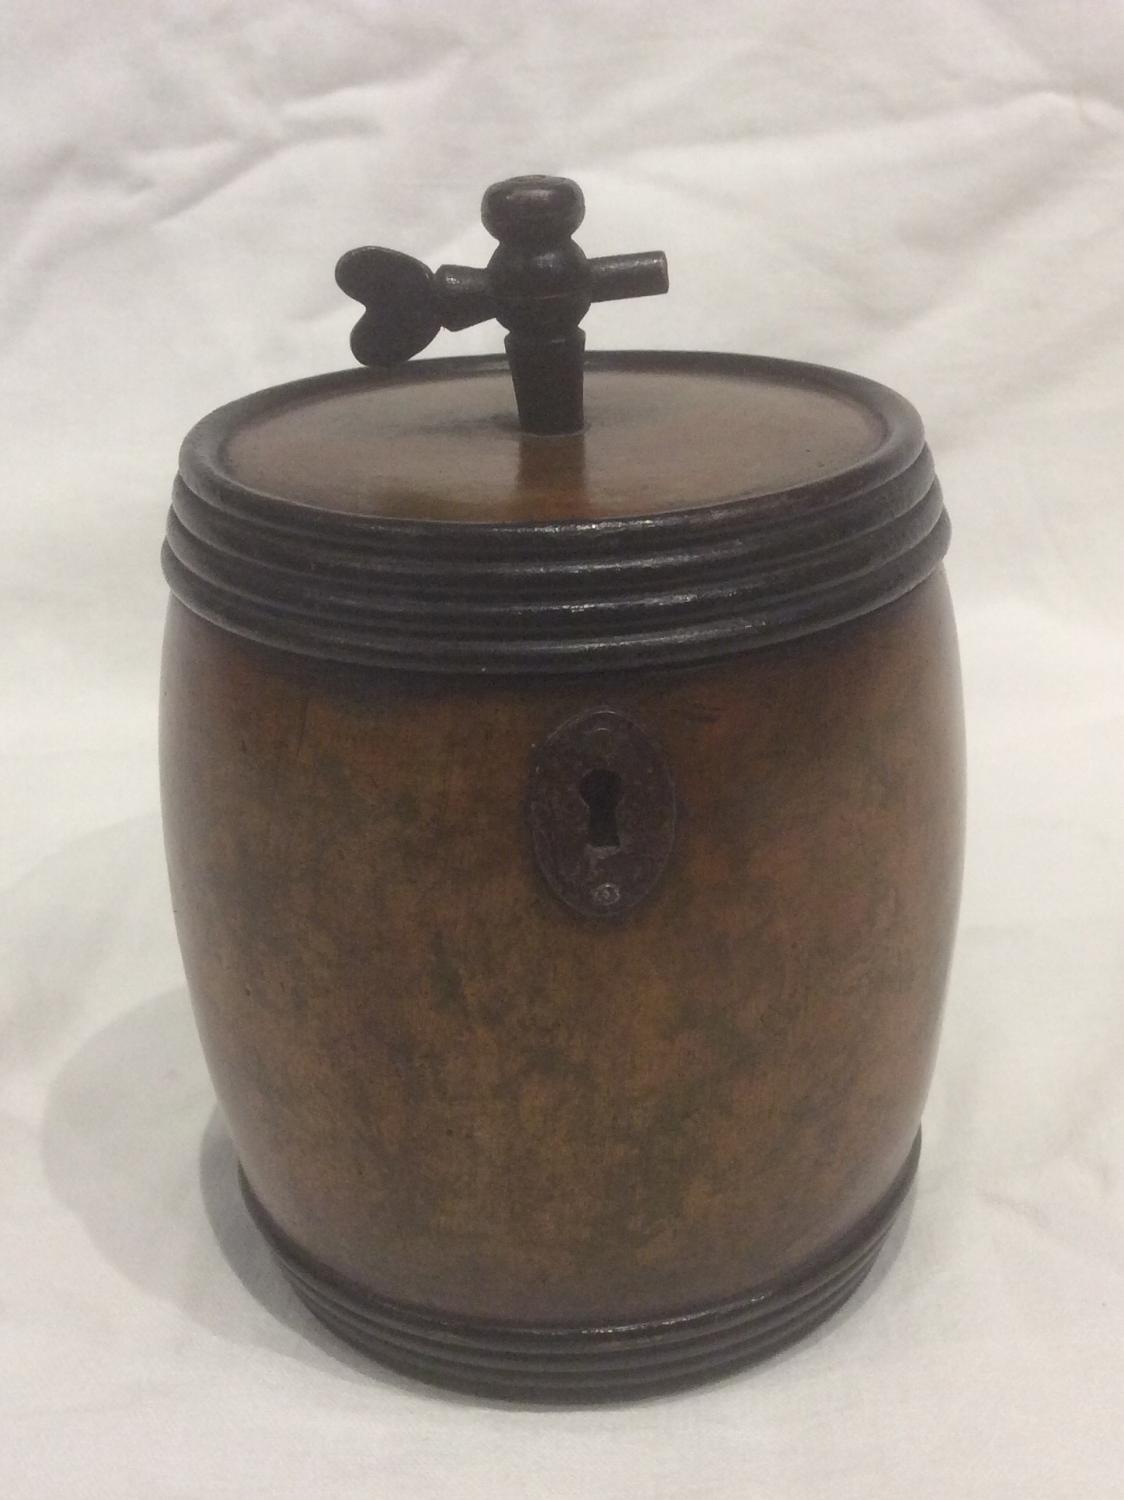 Rare early tea caddy in the form of a barrel